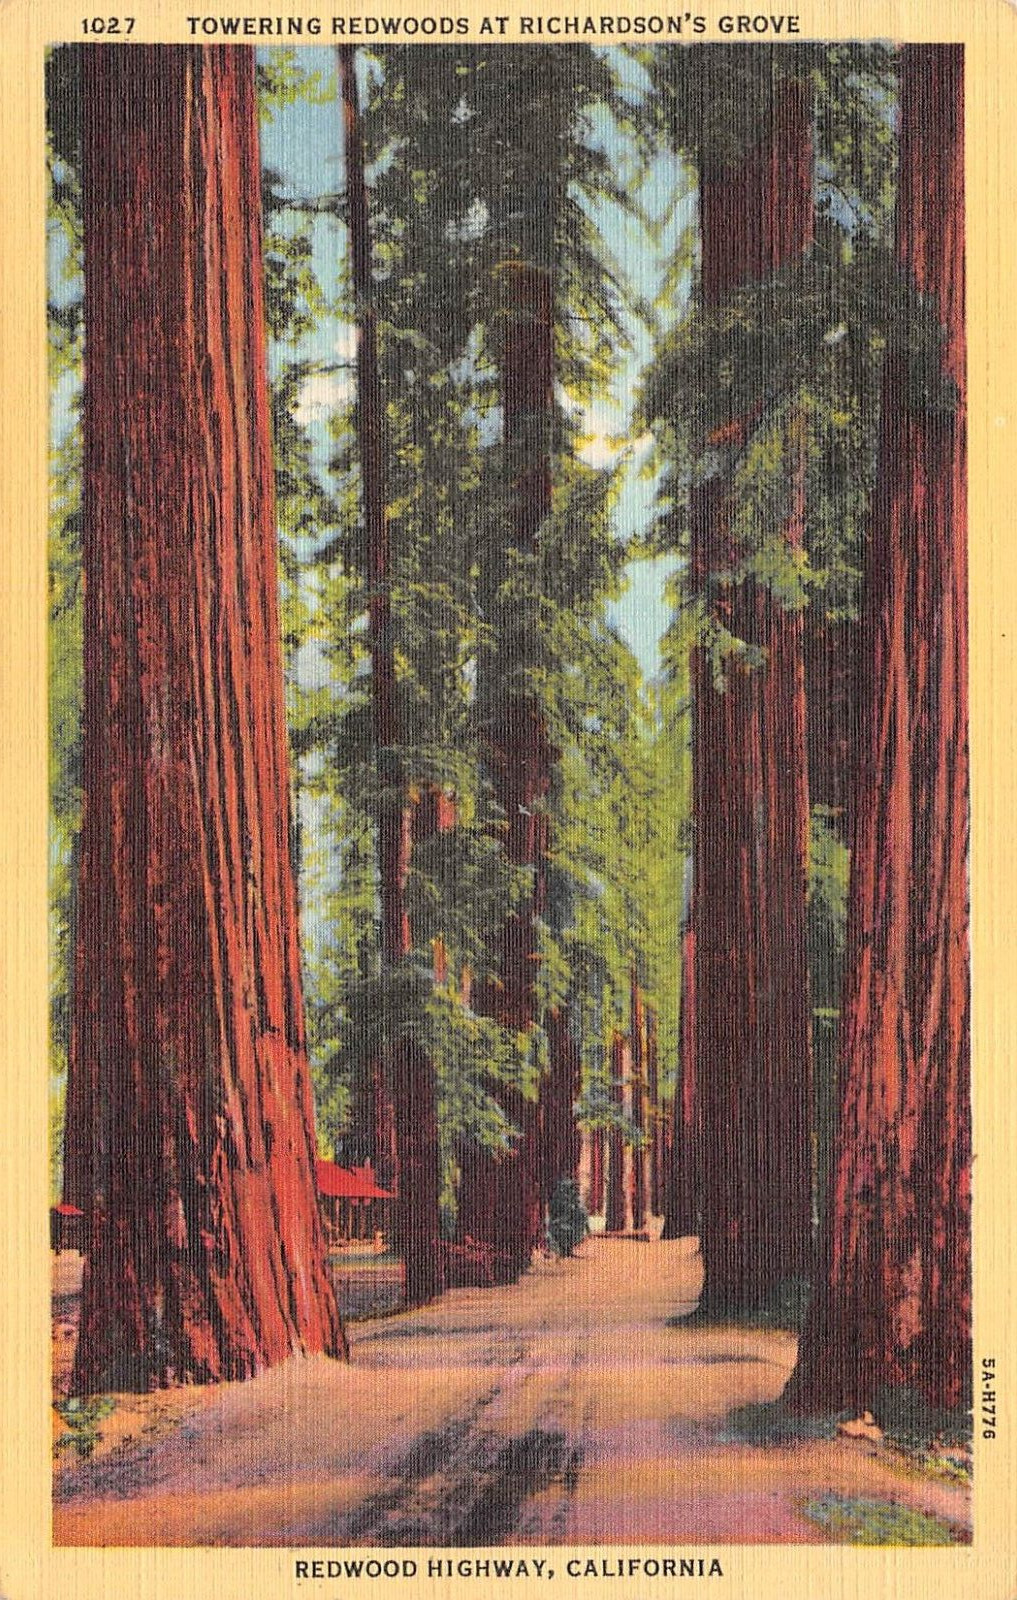 D2154 Towering Redwoods, Richardson's Grove, Redwood Hwy. CA 1935 Teich Linen PC